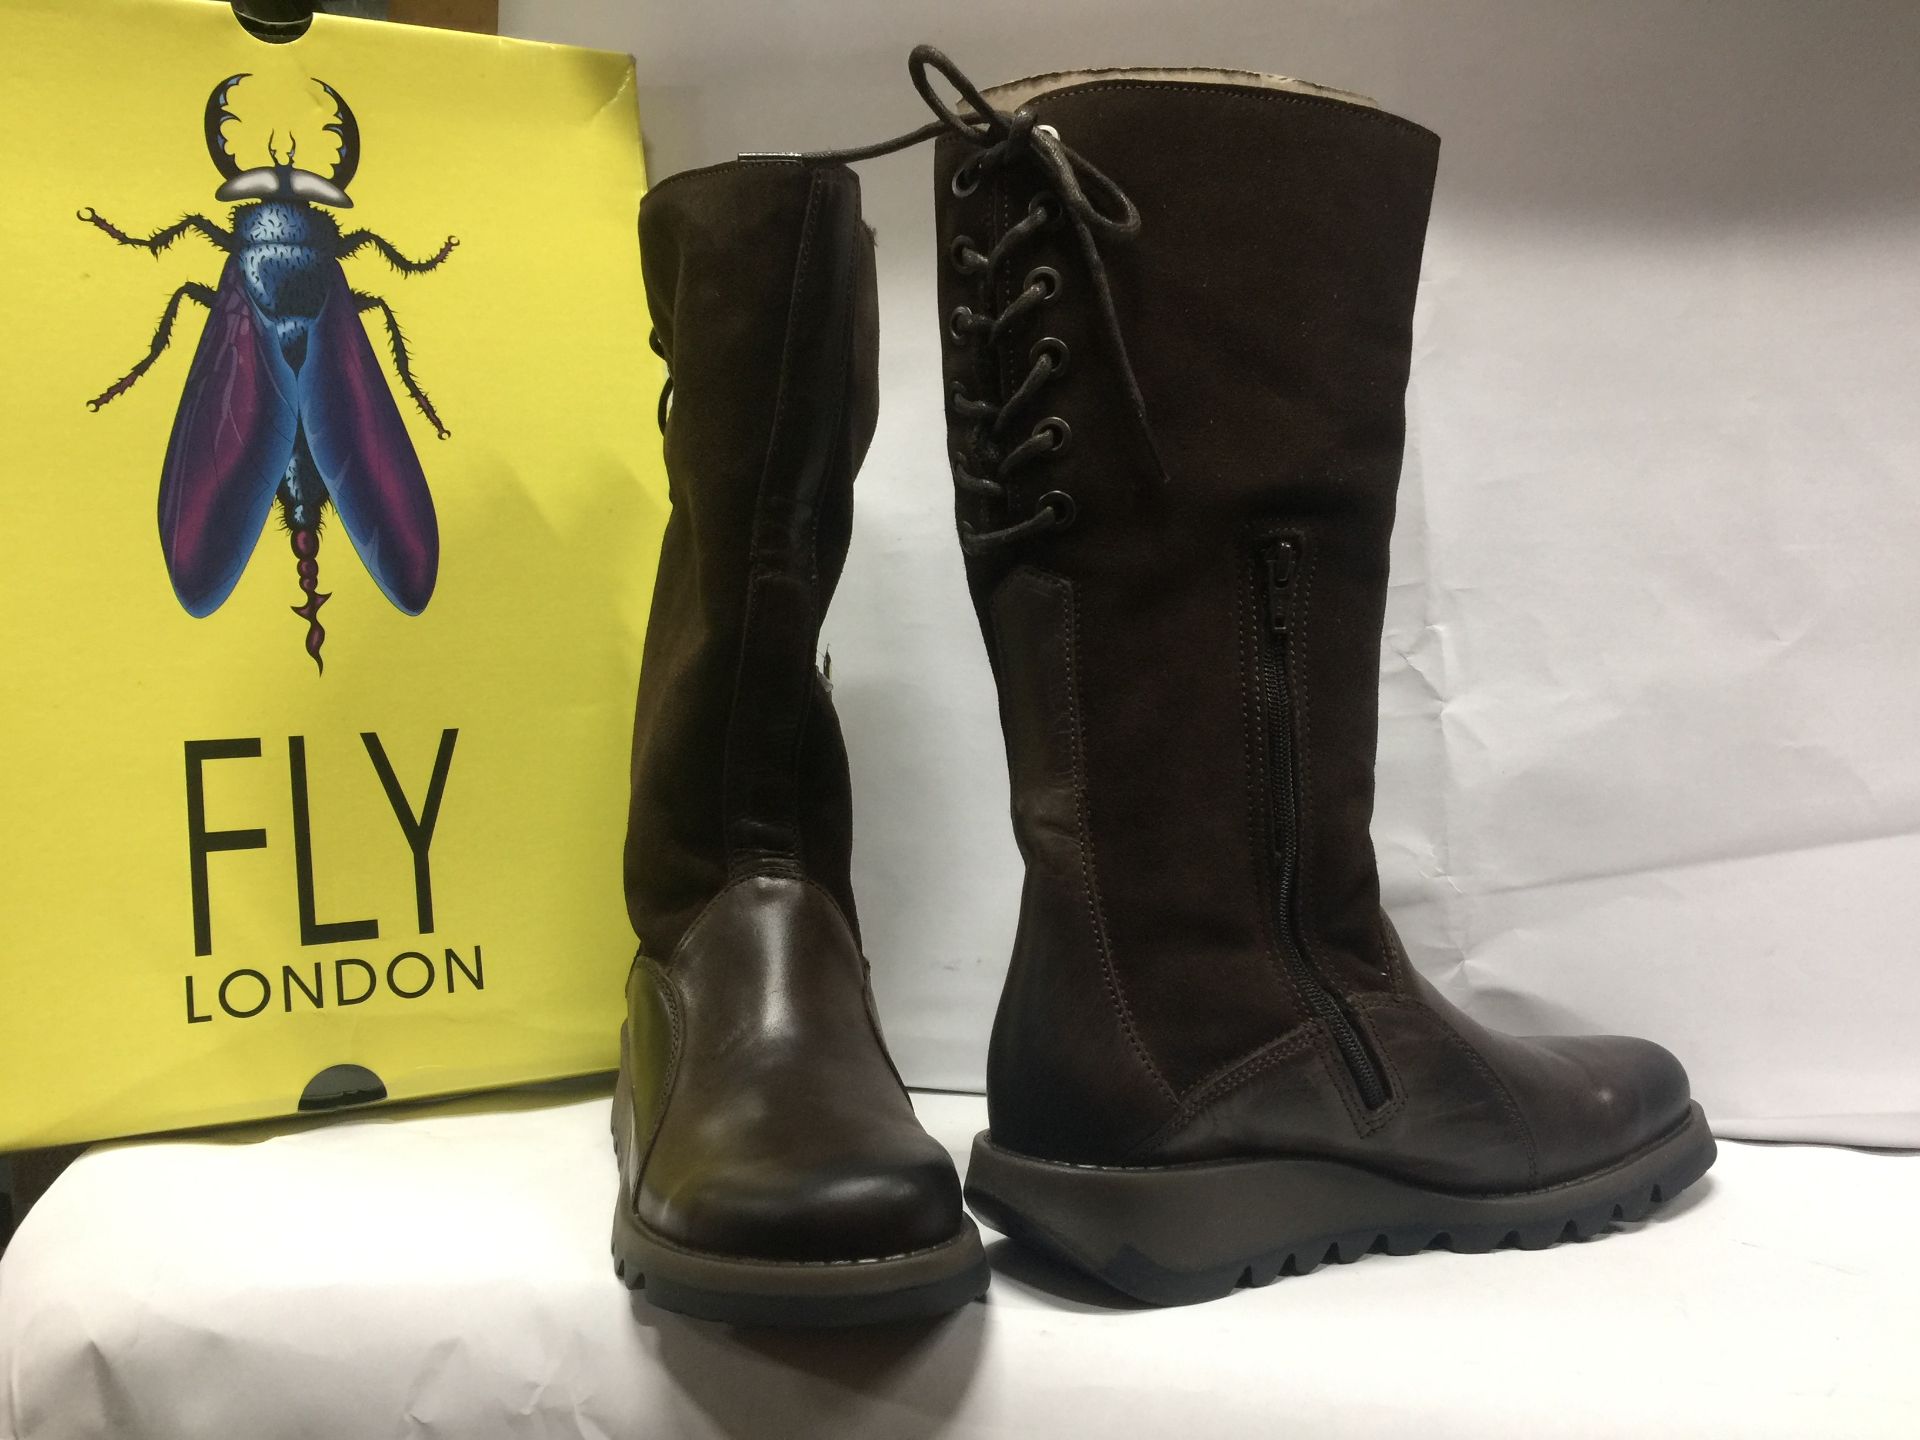 5 x Fly London Women's Boots Mixed Sizes, Styles and Colours Size Ranging EU 37 - EU 39 - Customer R - Image 3 of 4